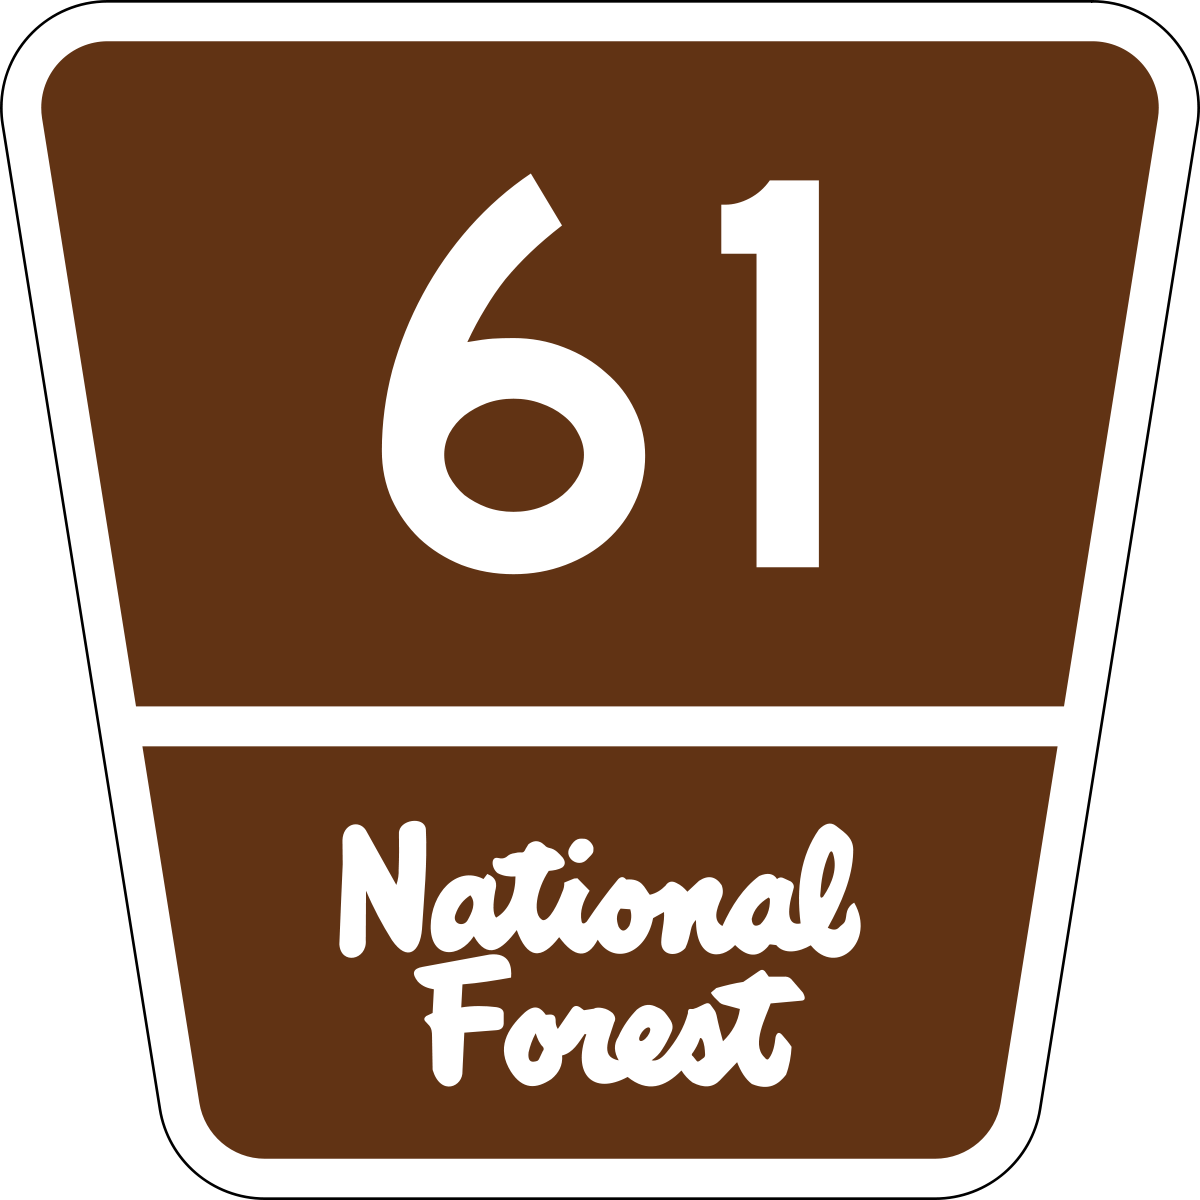 File:Forest Route 61.svg - Wikimedia Commons.